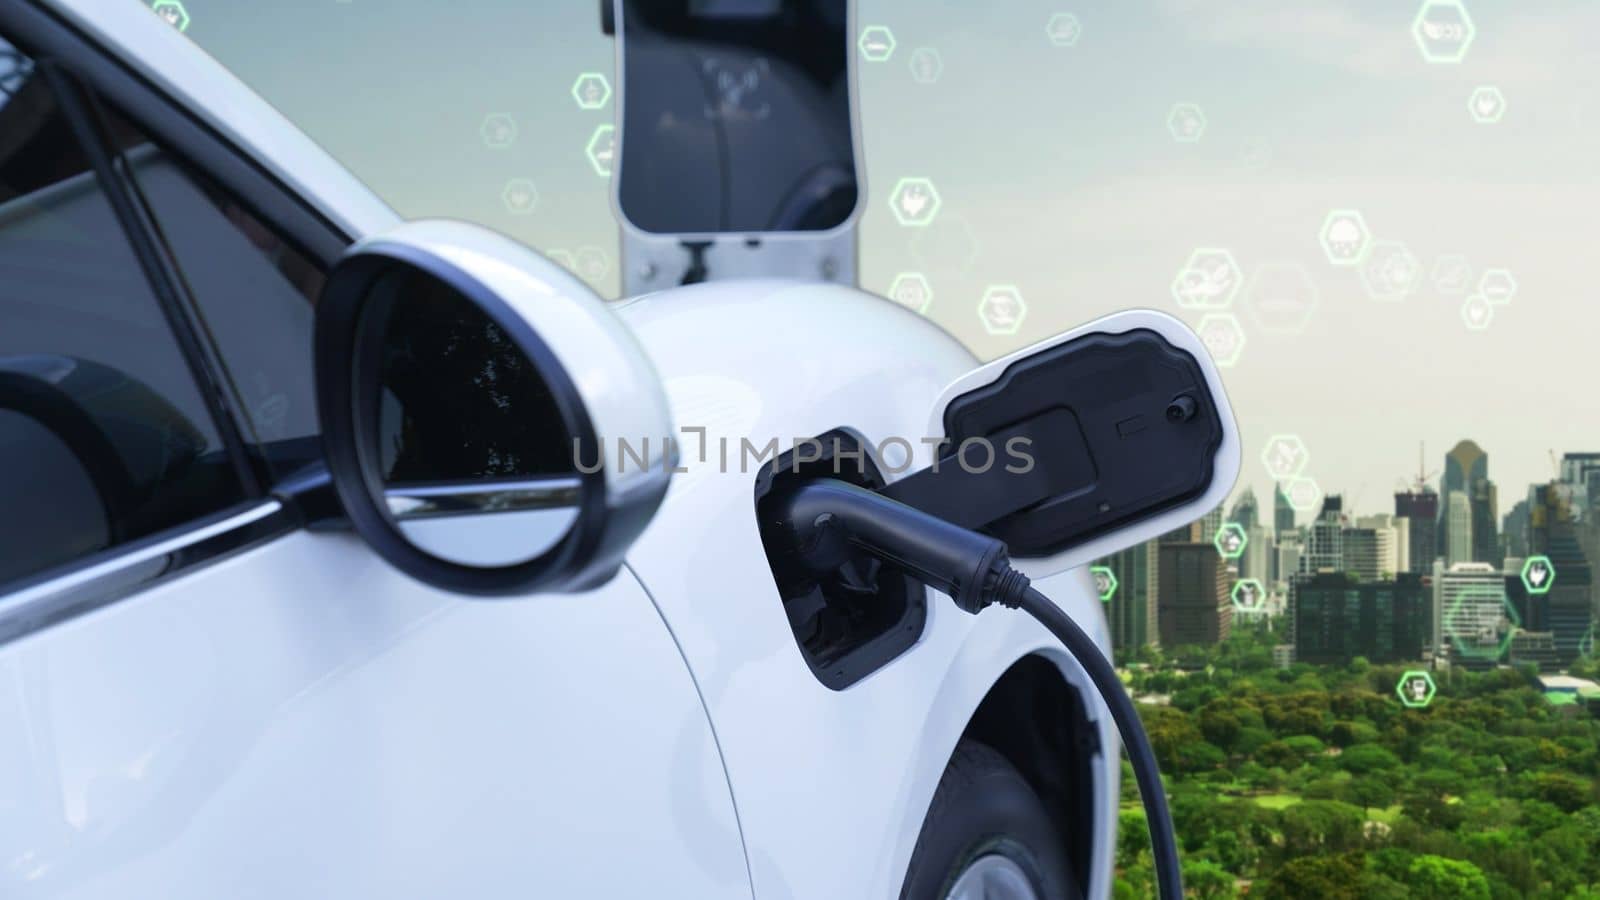 Progressive green city ESG symbol background with electric vehicle. by biancoblue